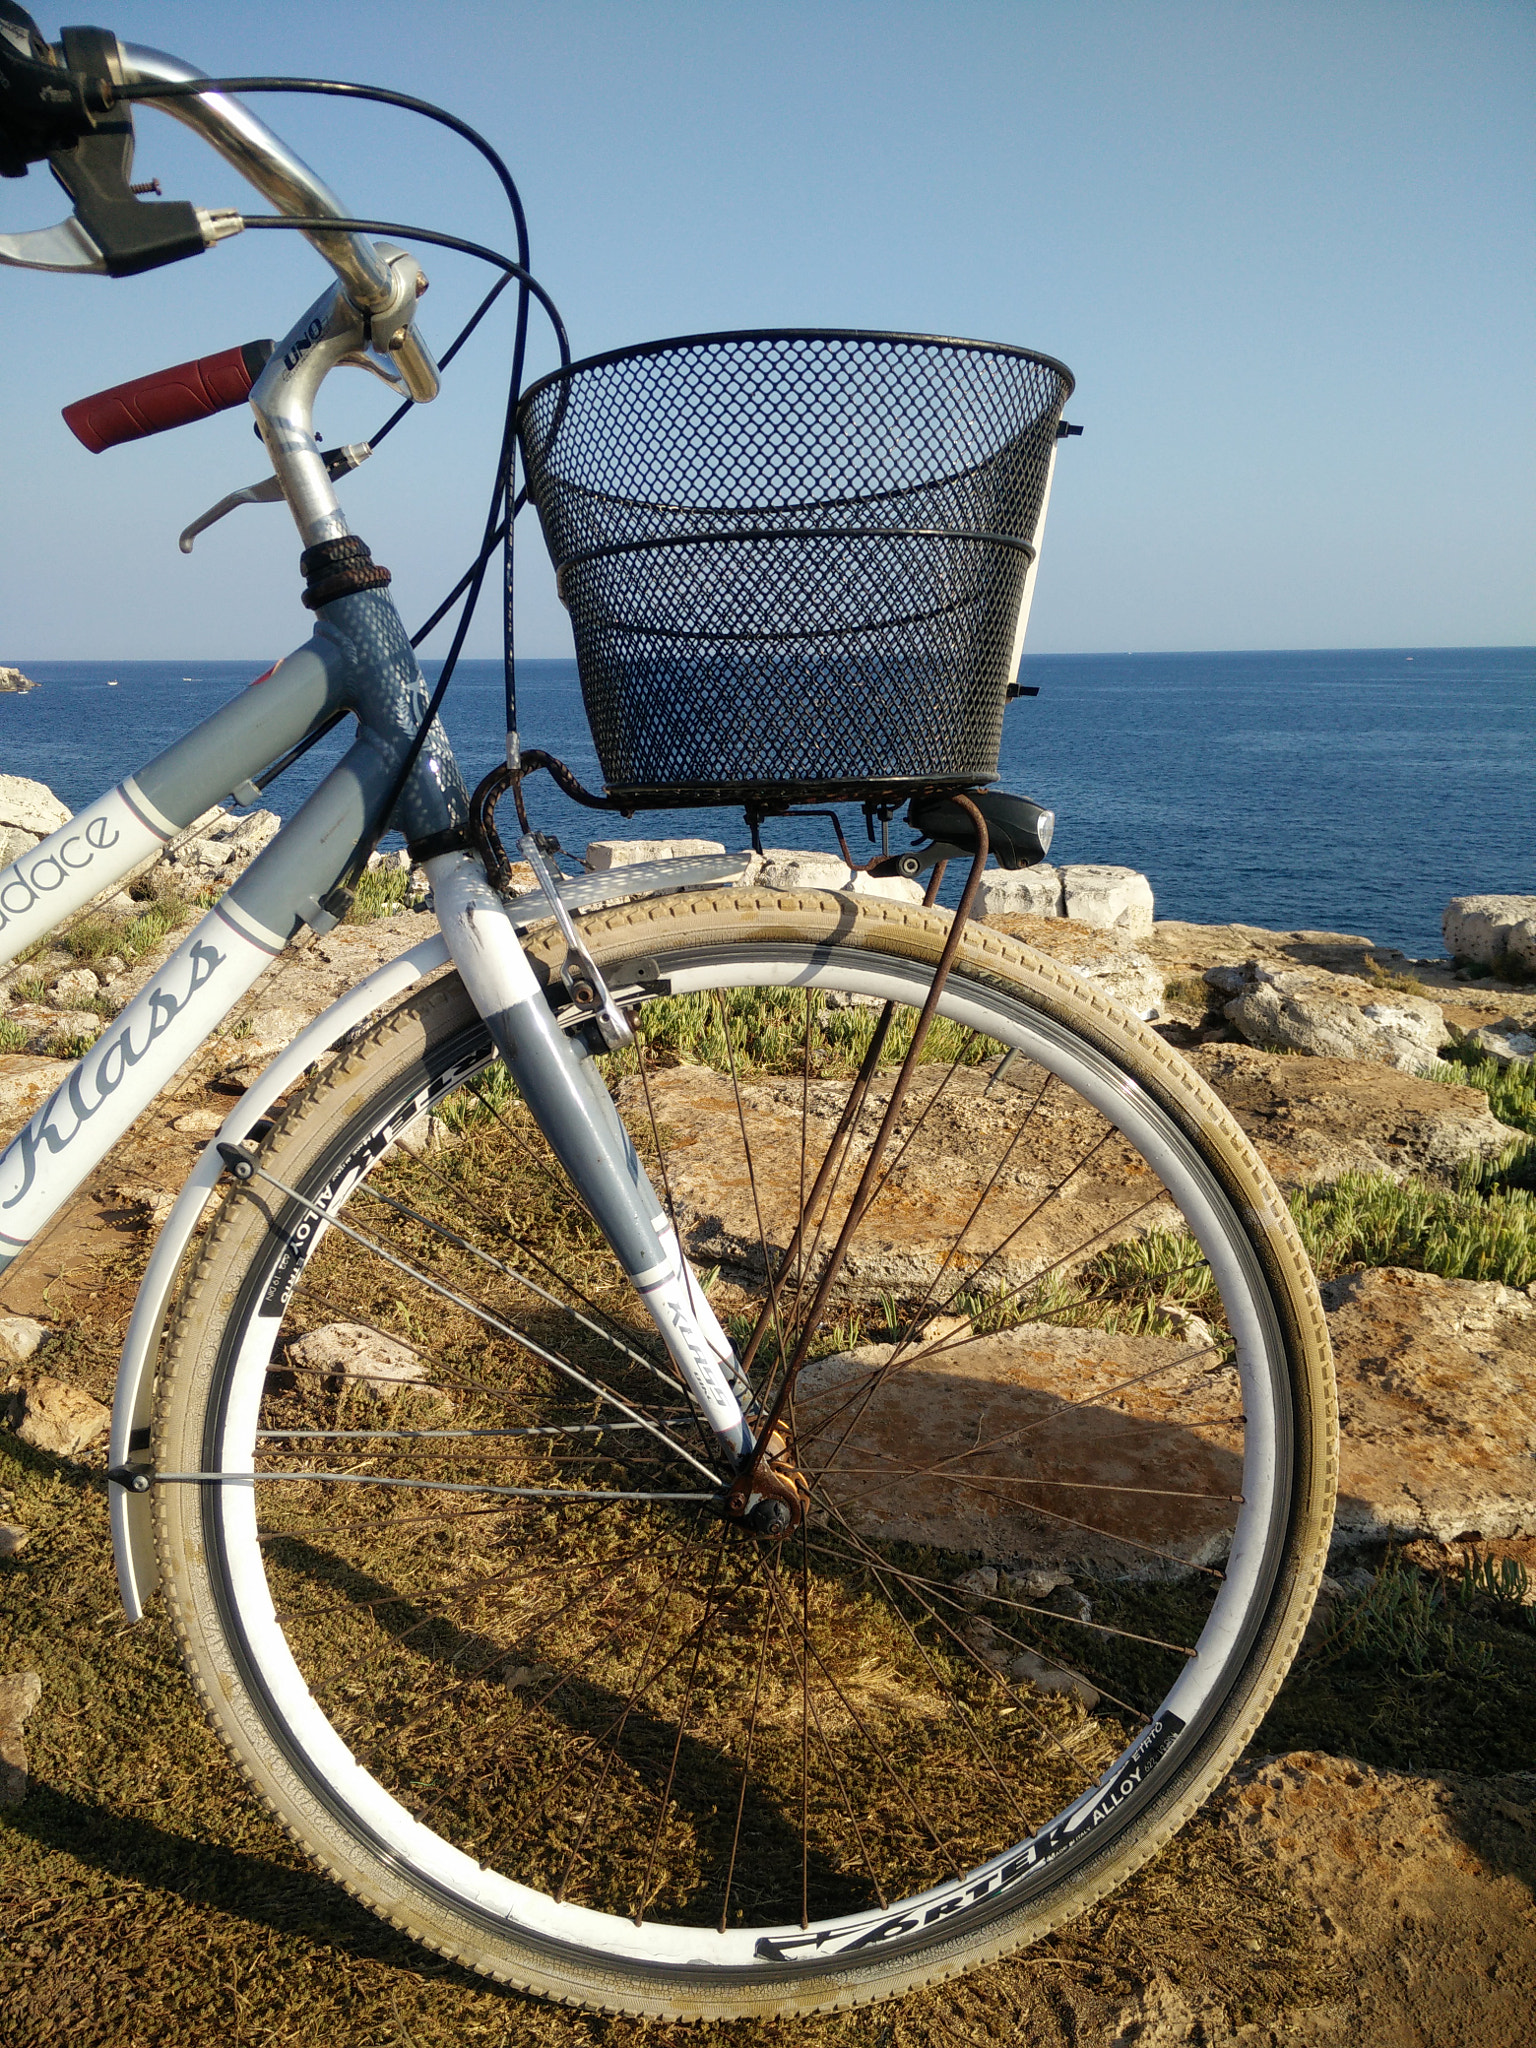 OPPO Find7 sample photo. Bike and sea photography